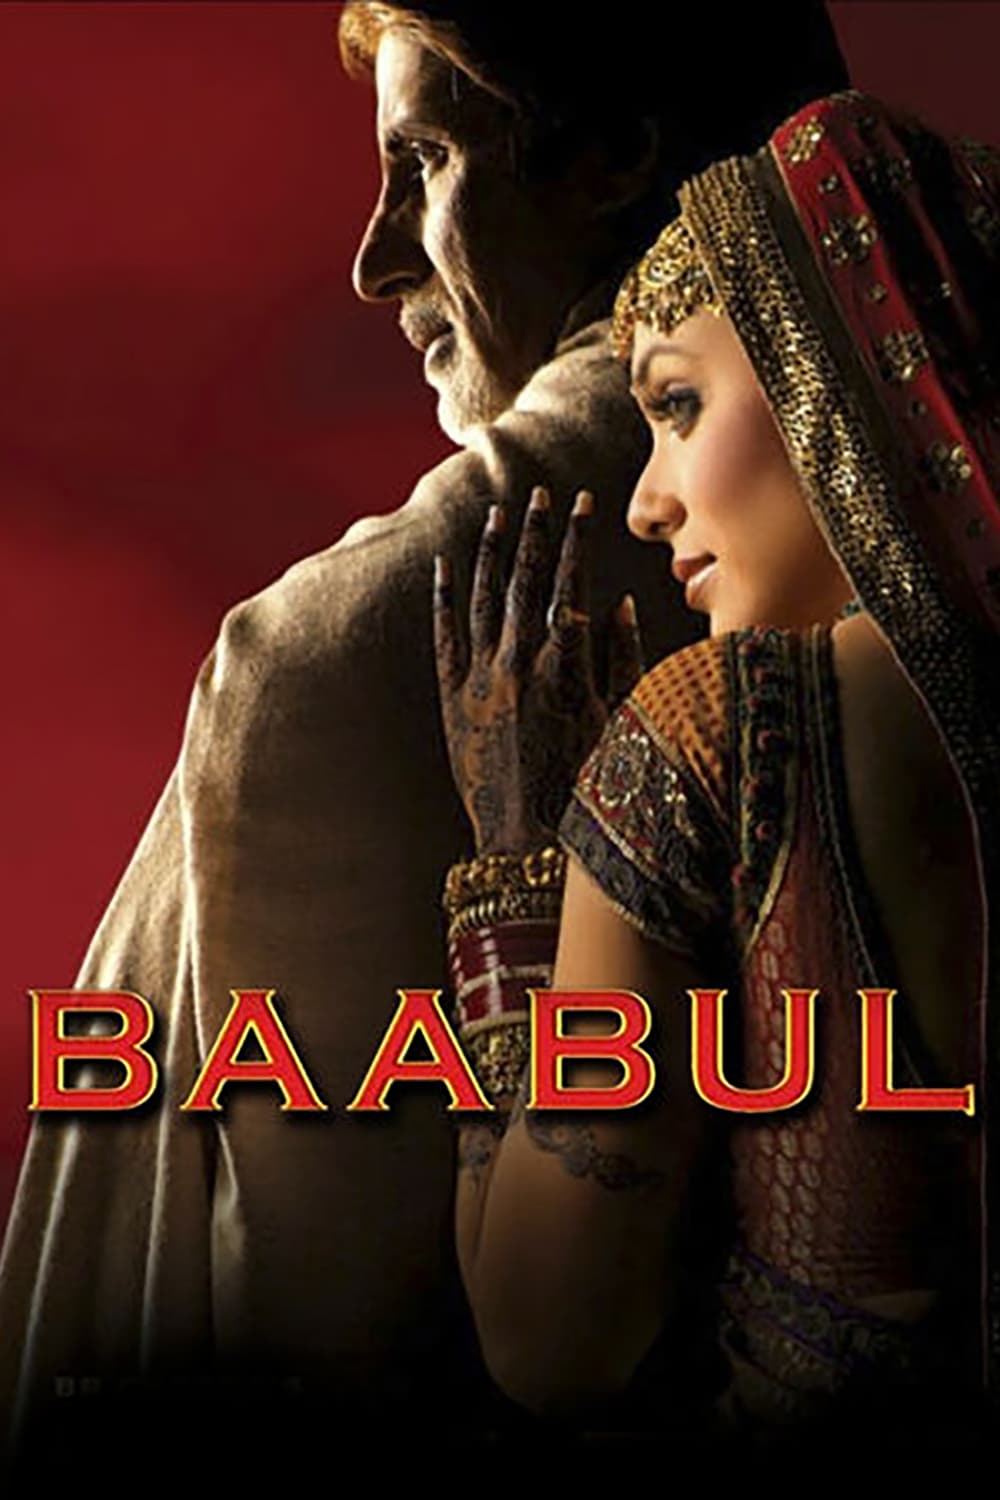 Poster for the movie "Baabul"